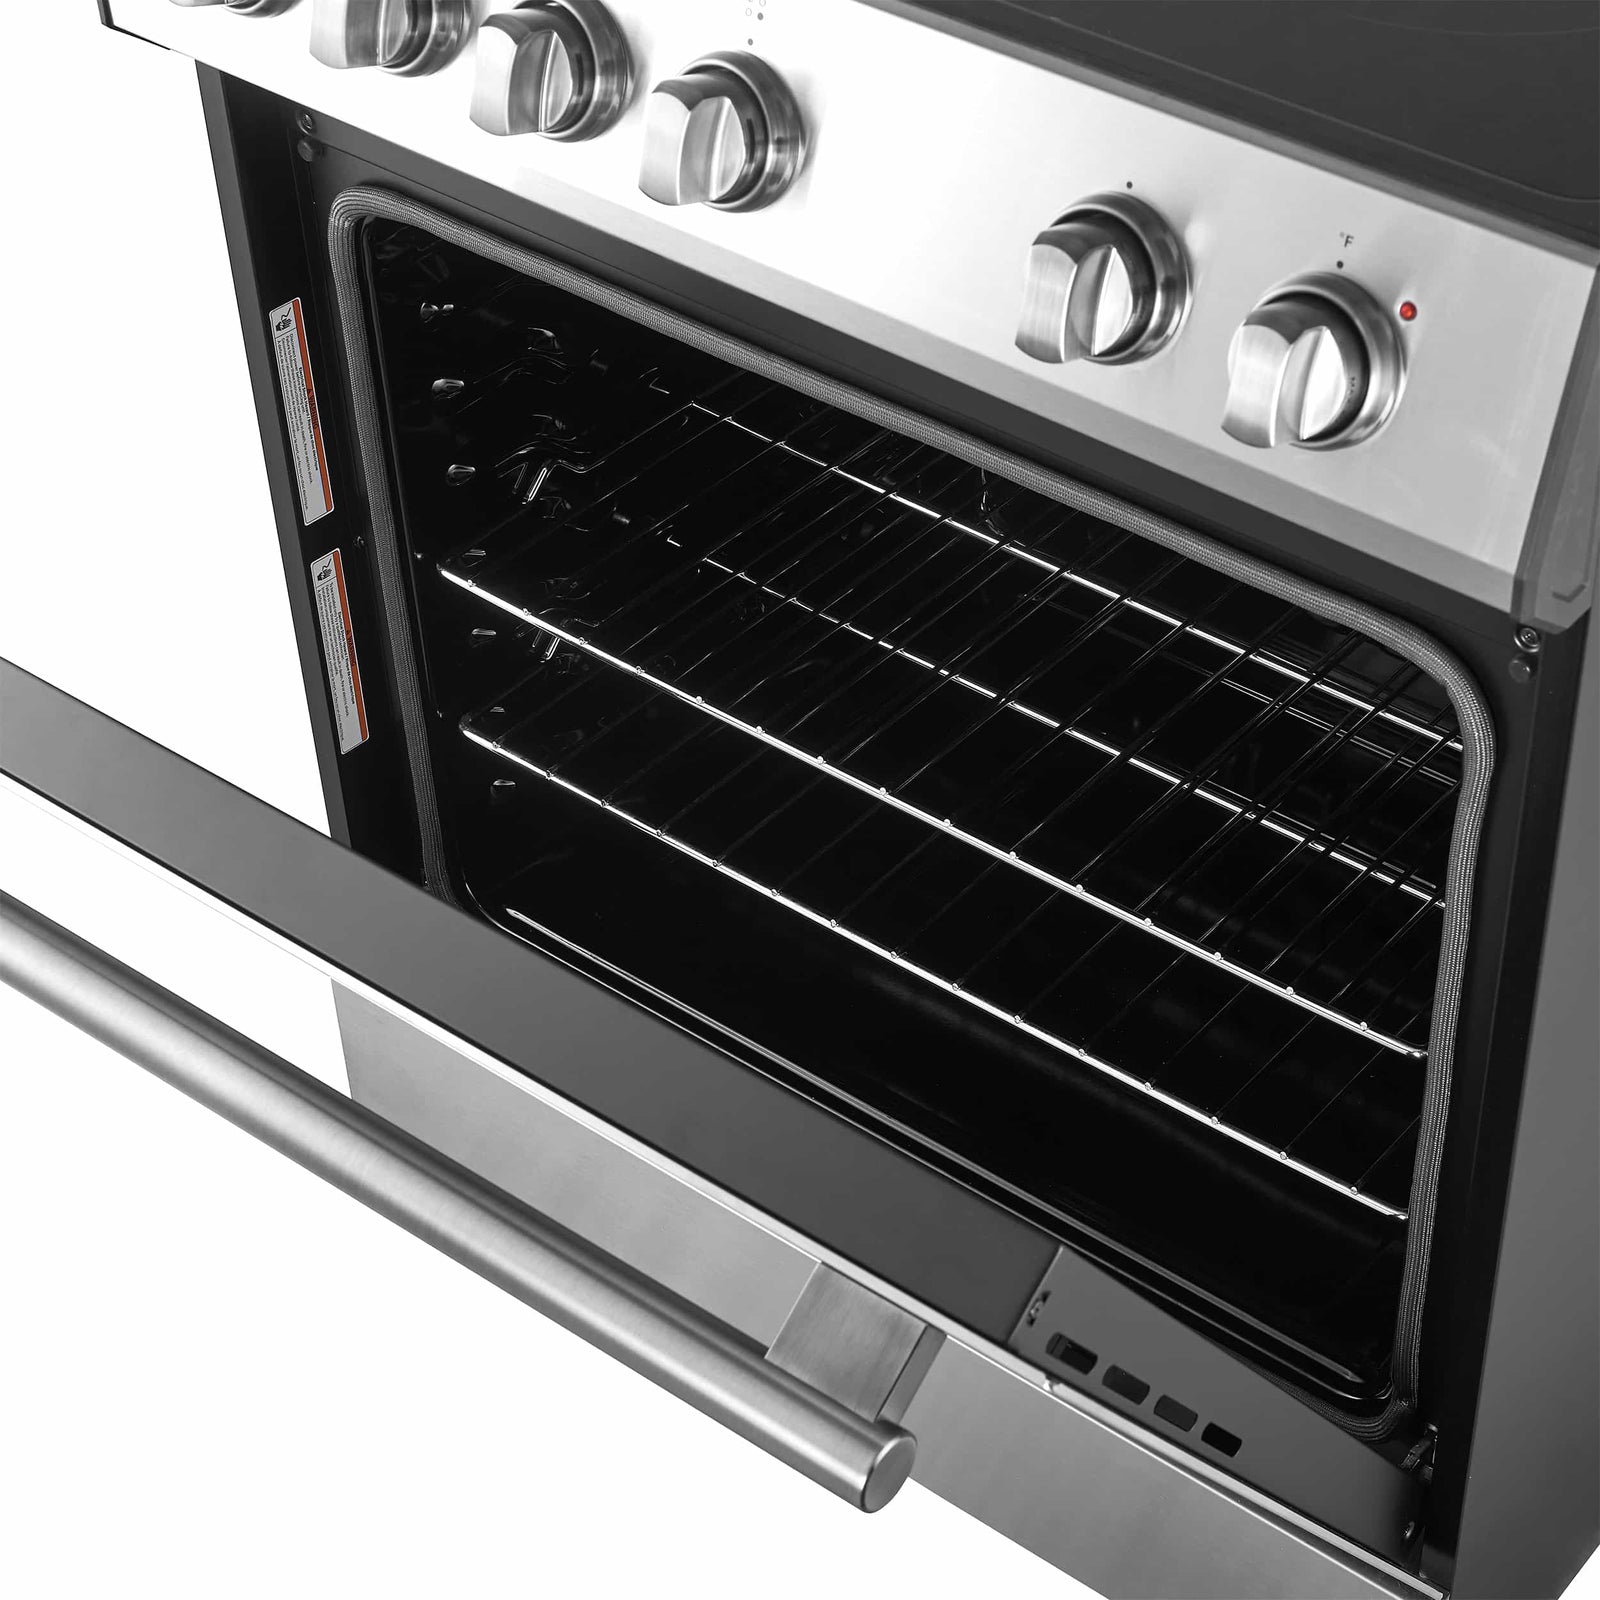 FORNO - Leonardo Espresso 30-Inch Electric Range with 5.0 cu. Ft. Electric Oven - Stainless Steel